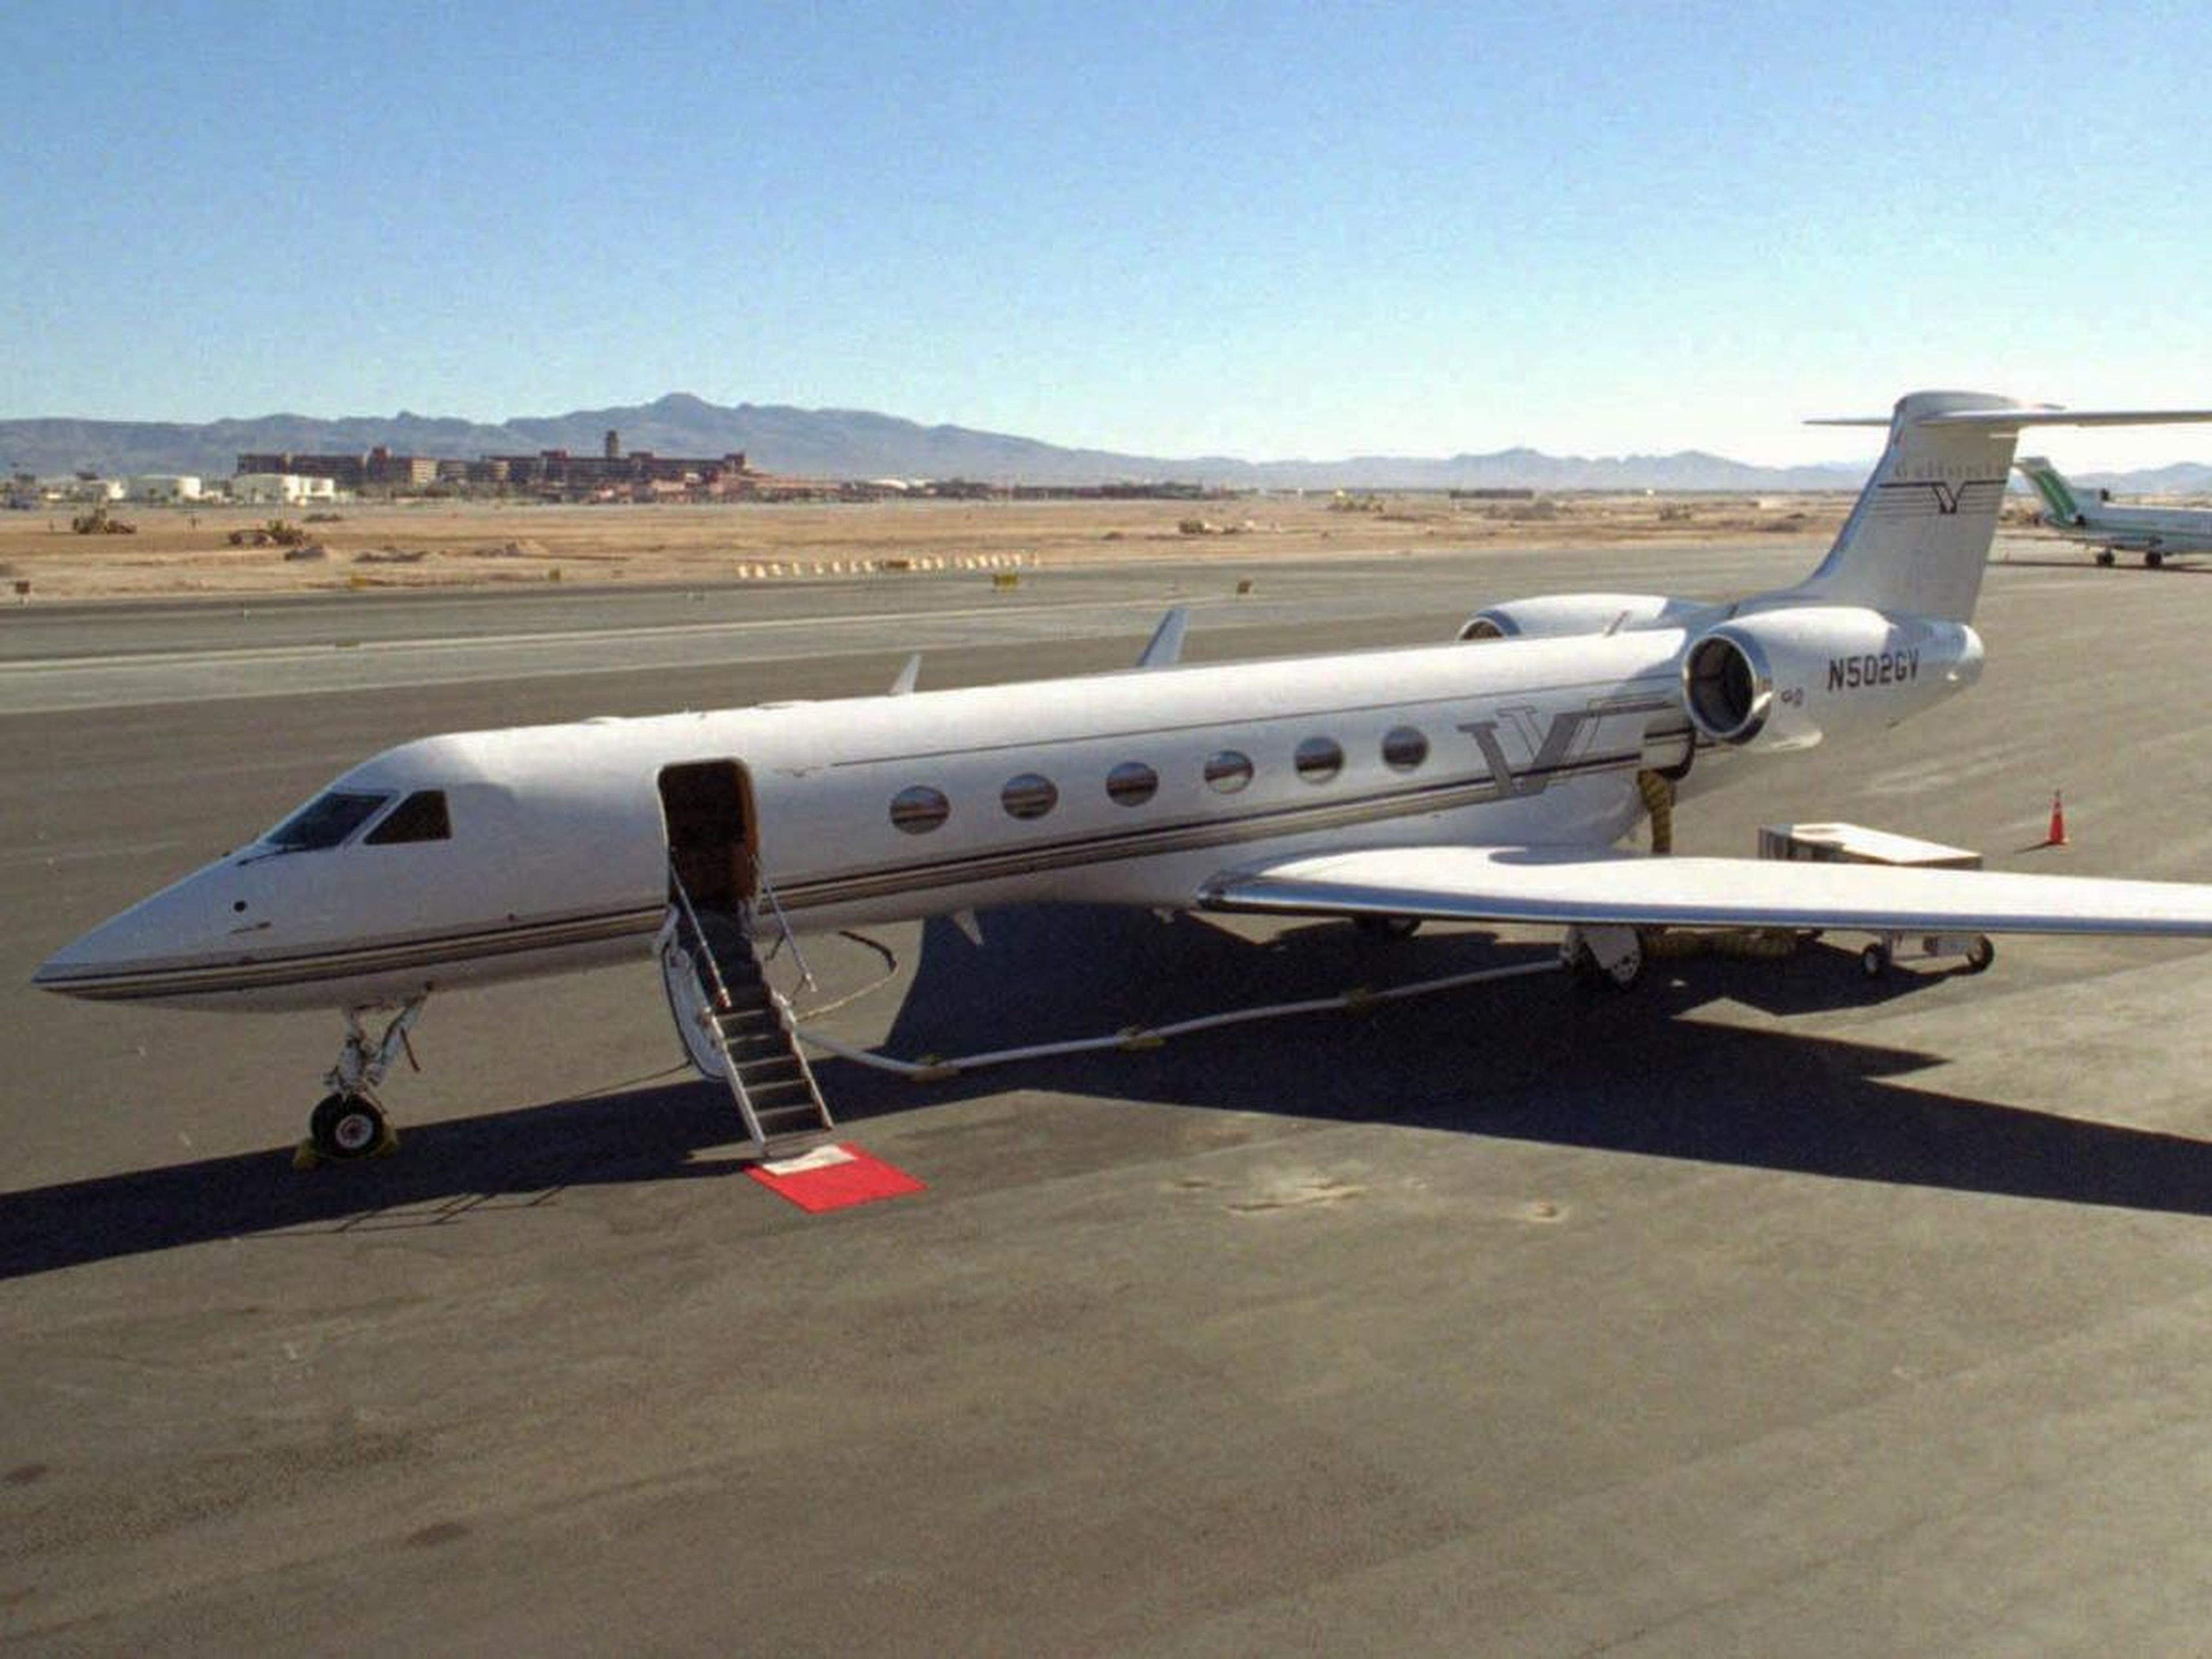 The late Steve Jobs once owned a Gulfstream V that seats up to 15 people. Apple gifted the private jet, and 10 million company shares, to Jobs in lieu of a pay raise in 2002.